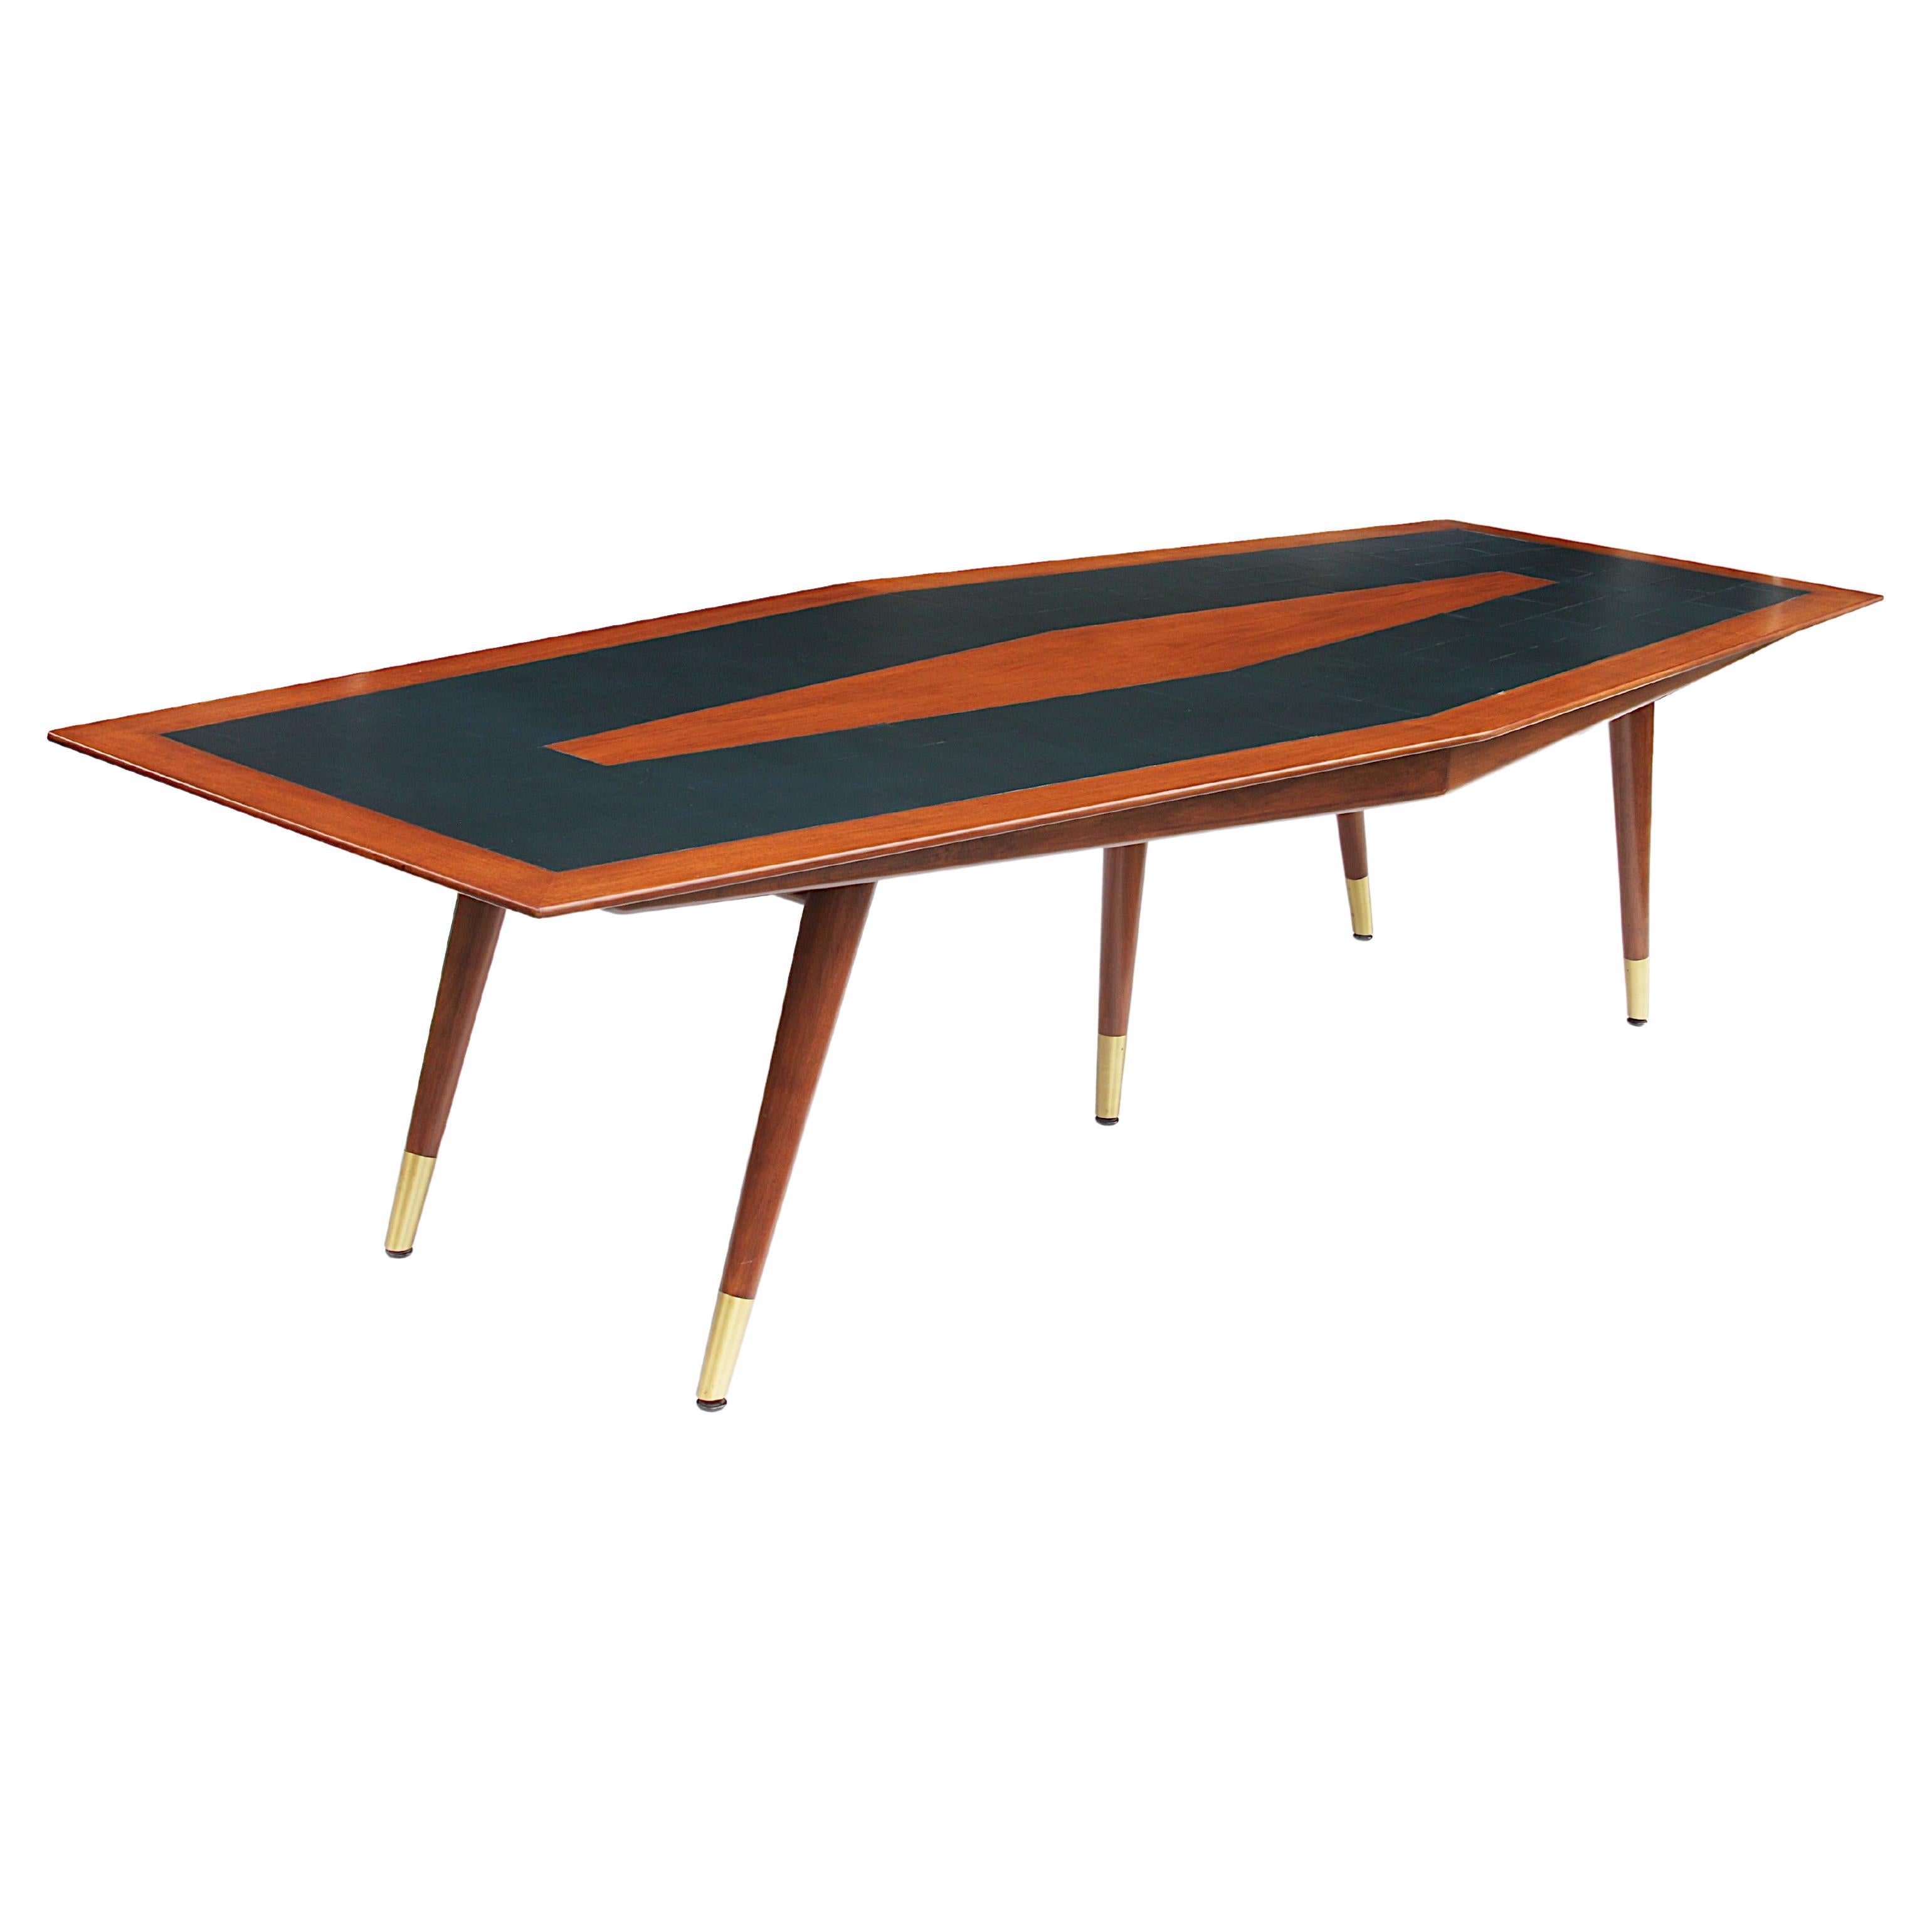 Rare 10ft Walnut Mid-Century Modern Conference Dining Table by Giacomo Buzzitta For Sale